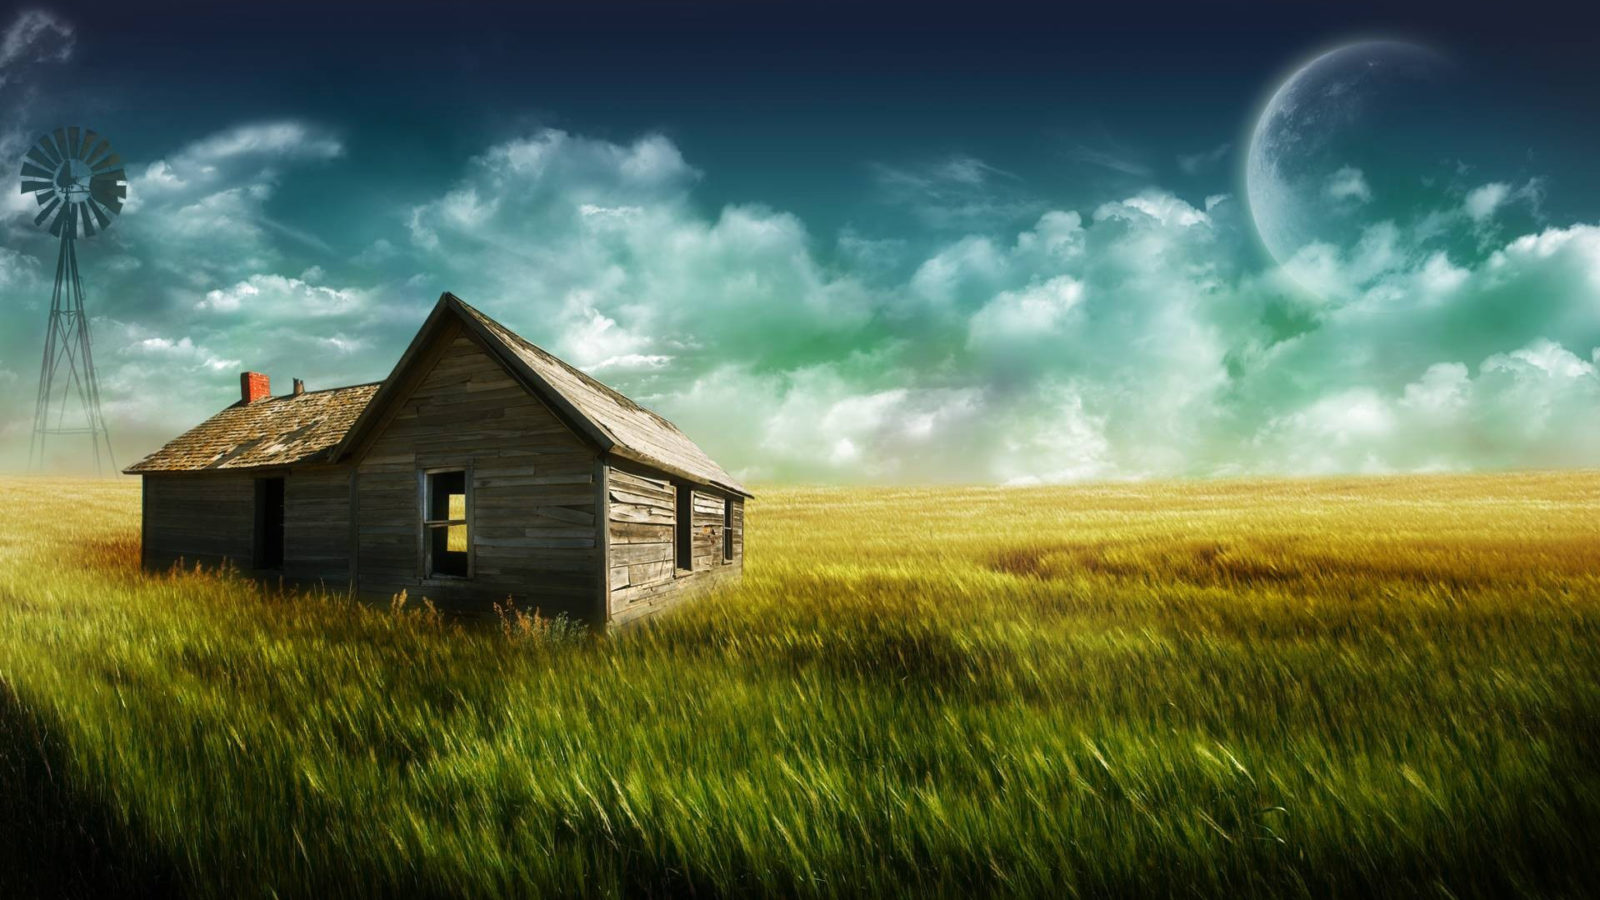 The Farmhouse Best Background Full HD1920x1080p, 1280x720p, HD Wallpapers Backgrounds Desktop, iphone & Android Free Download